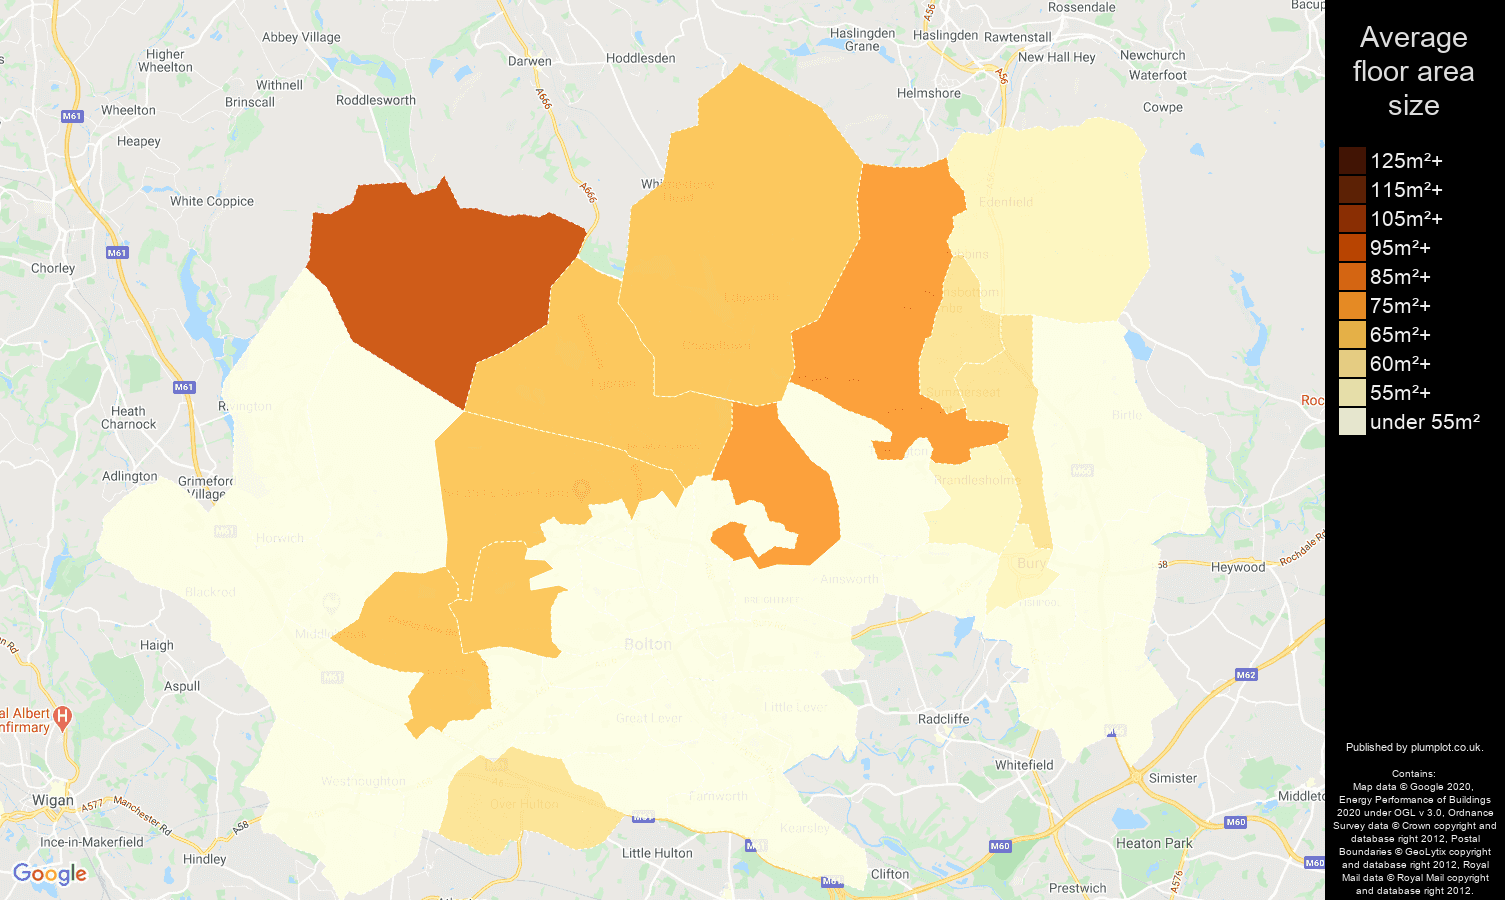 Bolton map of average floor area size of flats